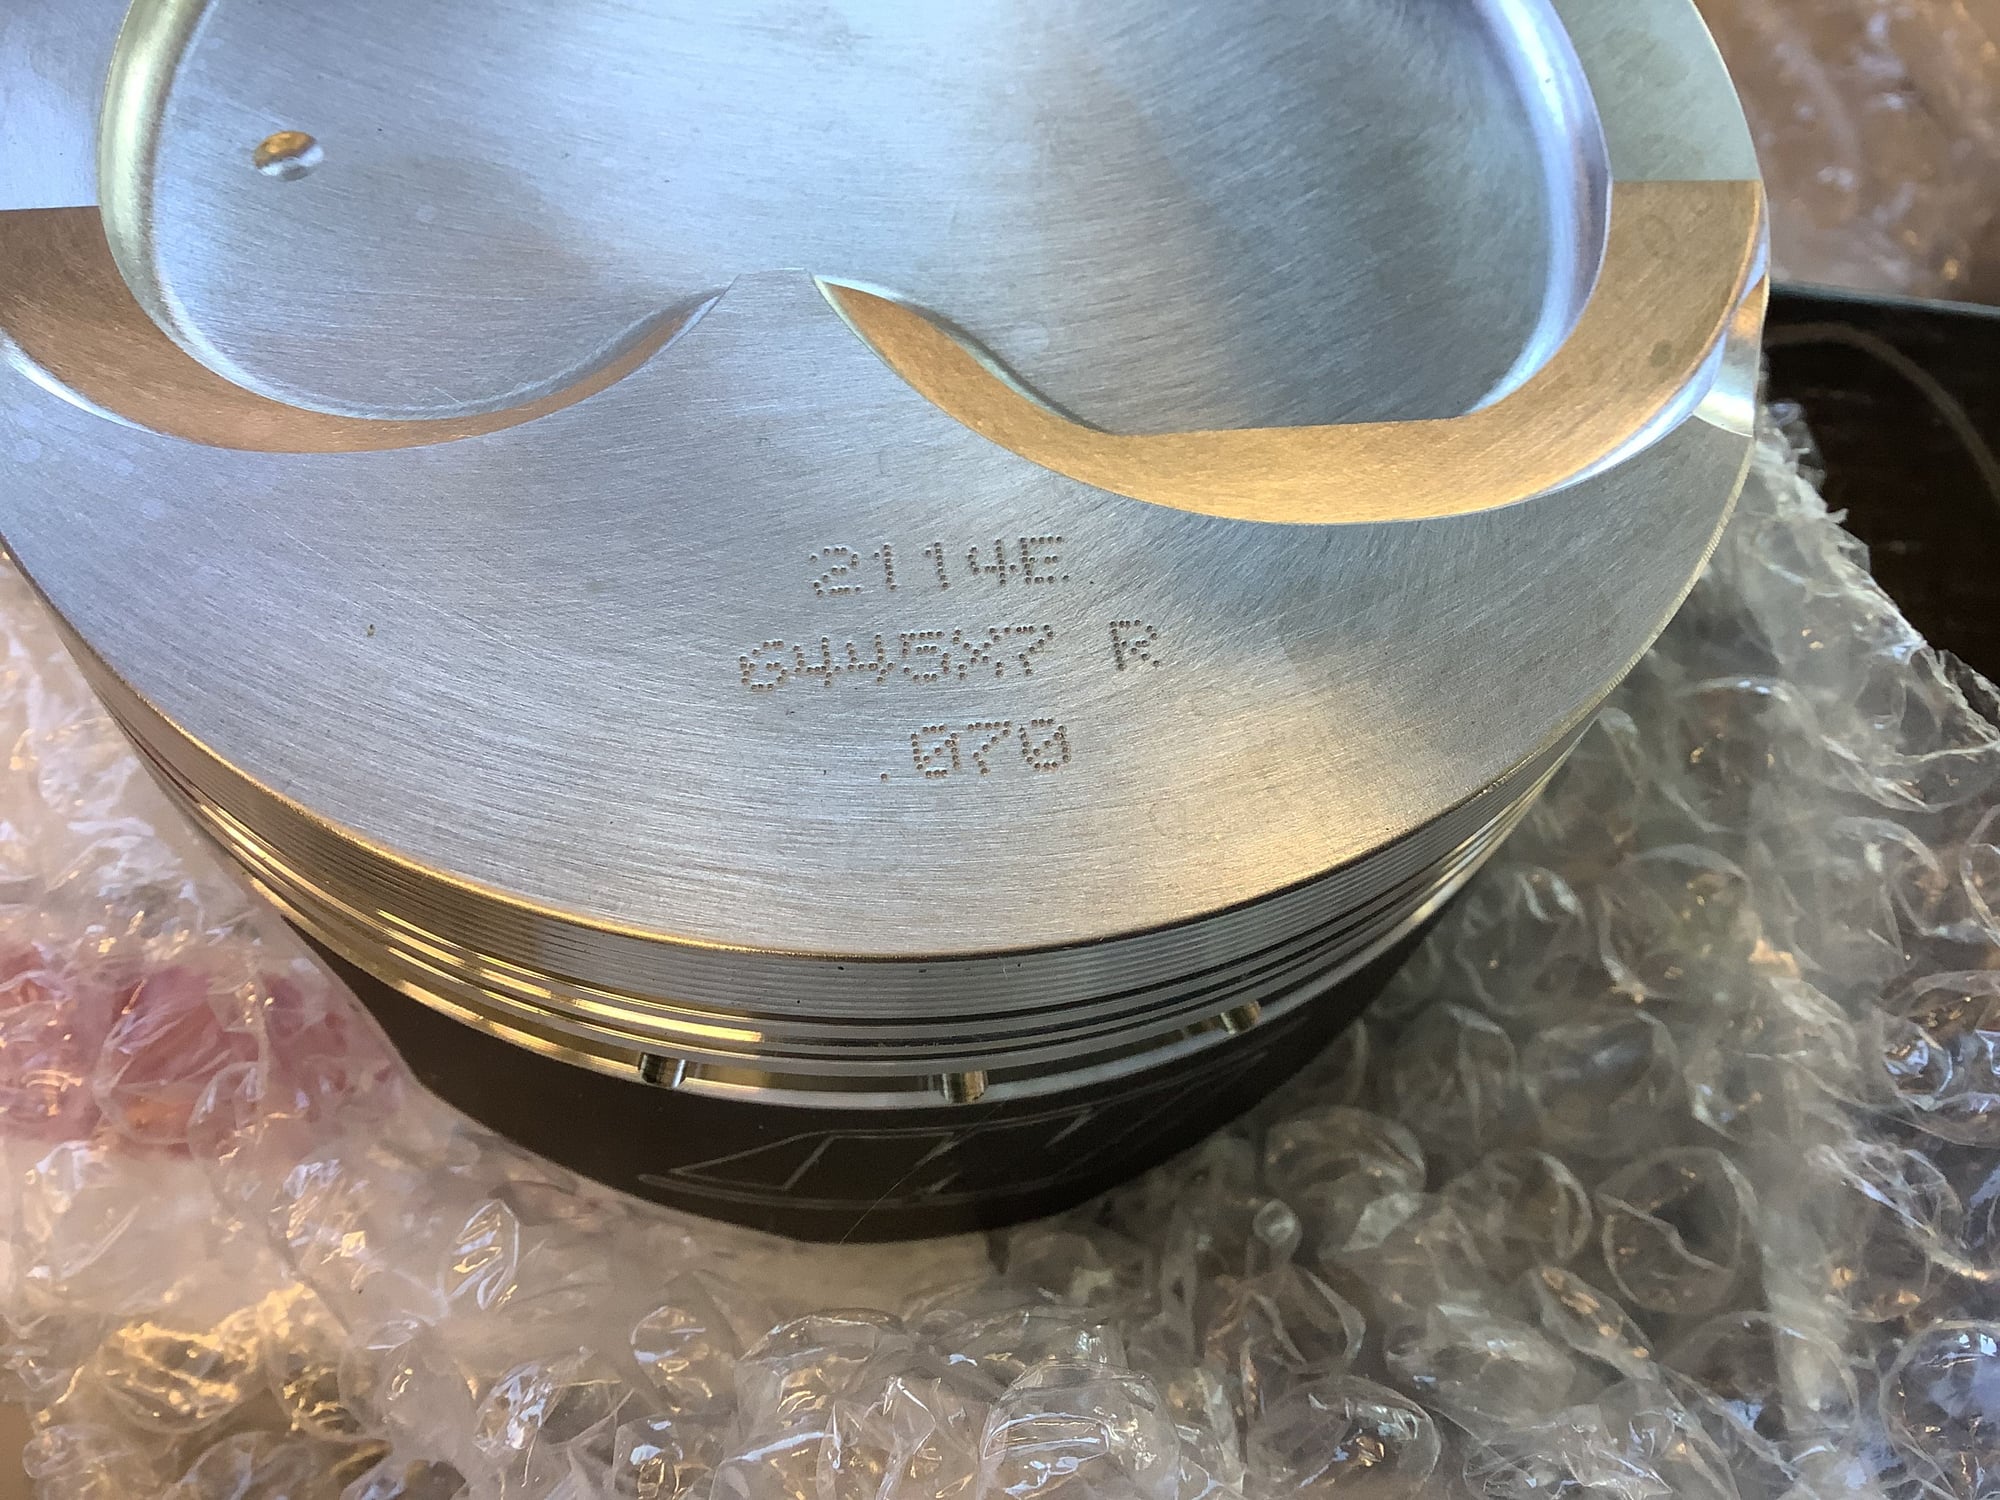 Engine - Internals - New Wiseco K445x7 4.070 Pistons for 4” stroke with GFX rings and pins  *SOLD* - New - 1998 to 2014  All Models - Hemet, CA 92544, United States